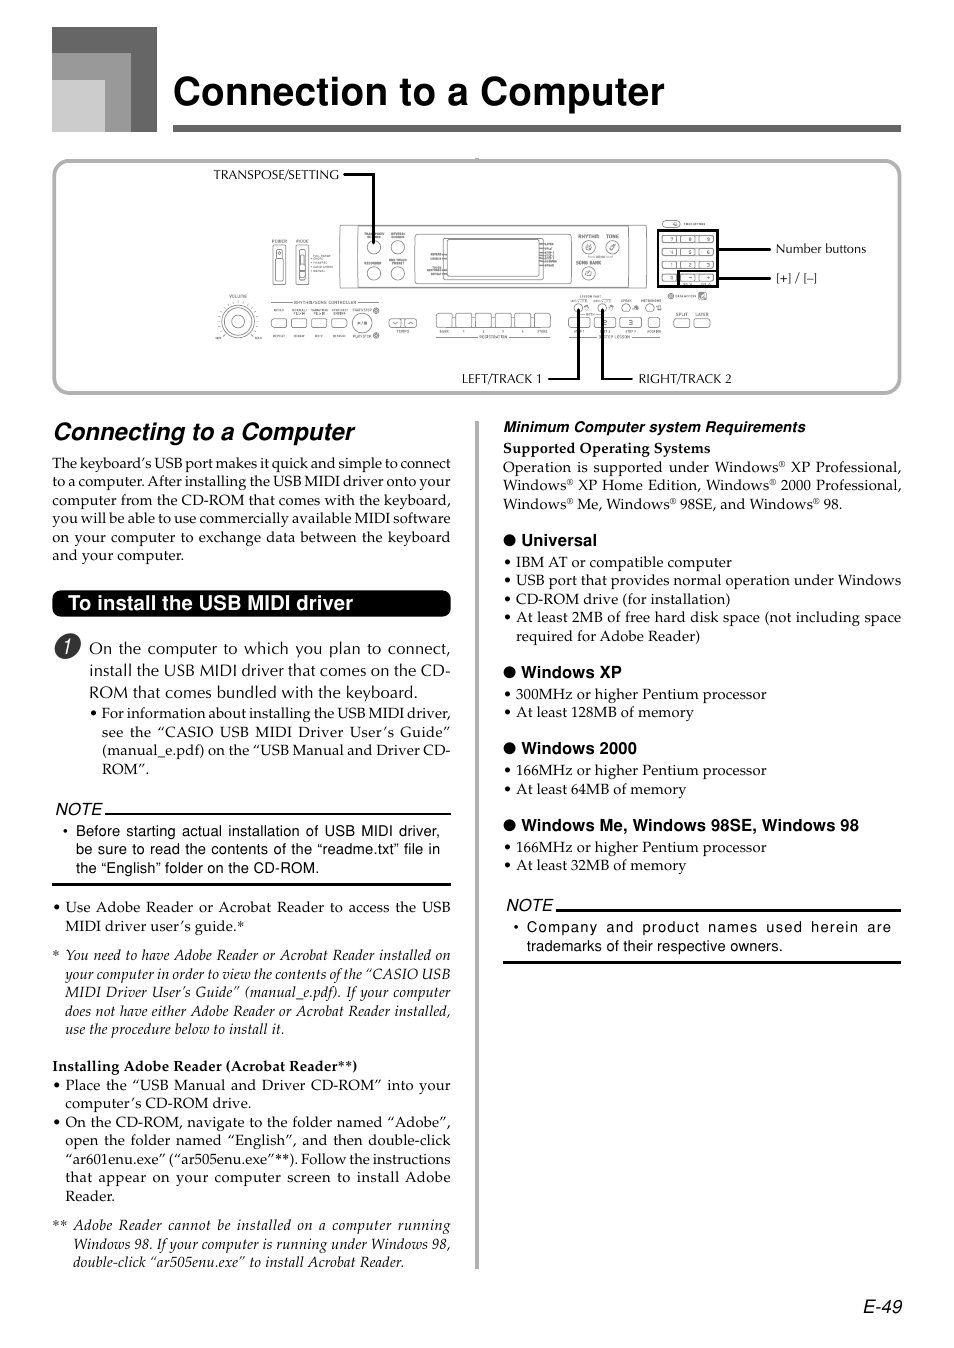 Connection to a computer, Connecting to a computer, E-49 | Casio User Manual | Page 51 / 71